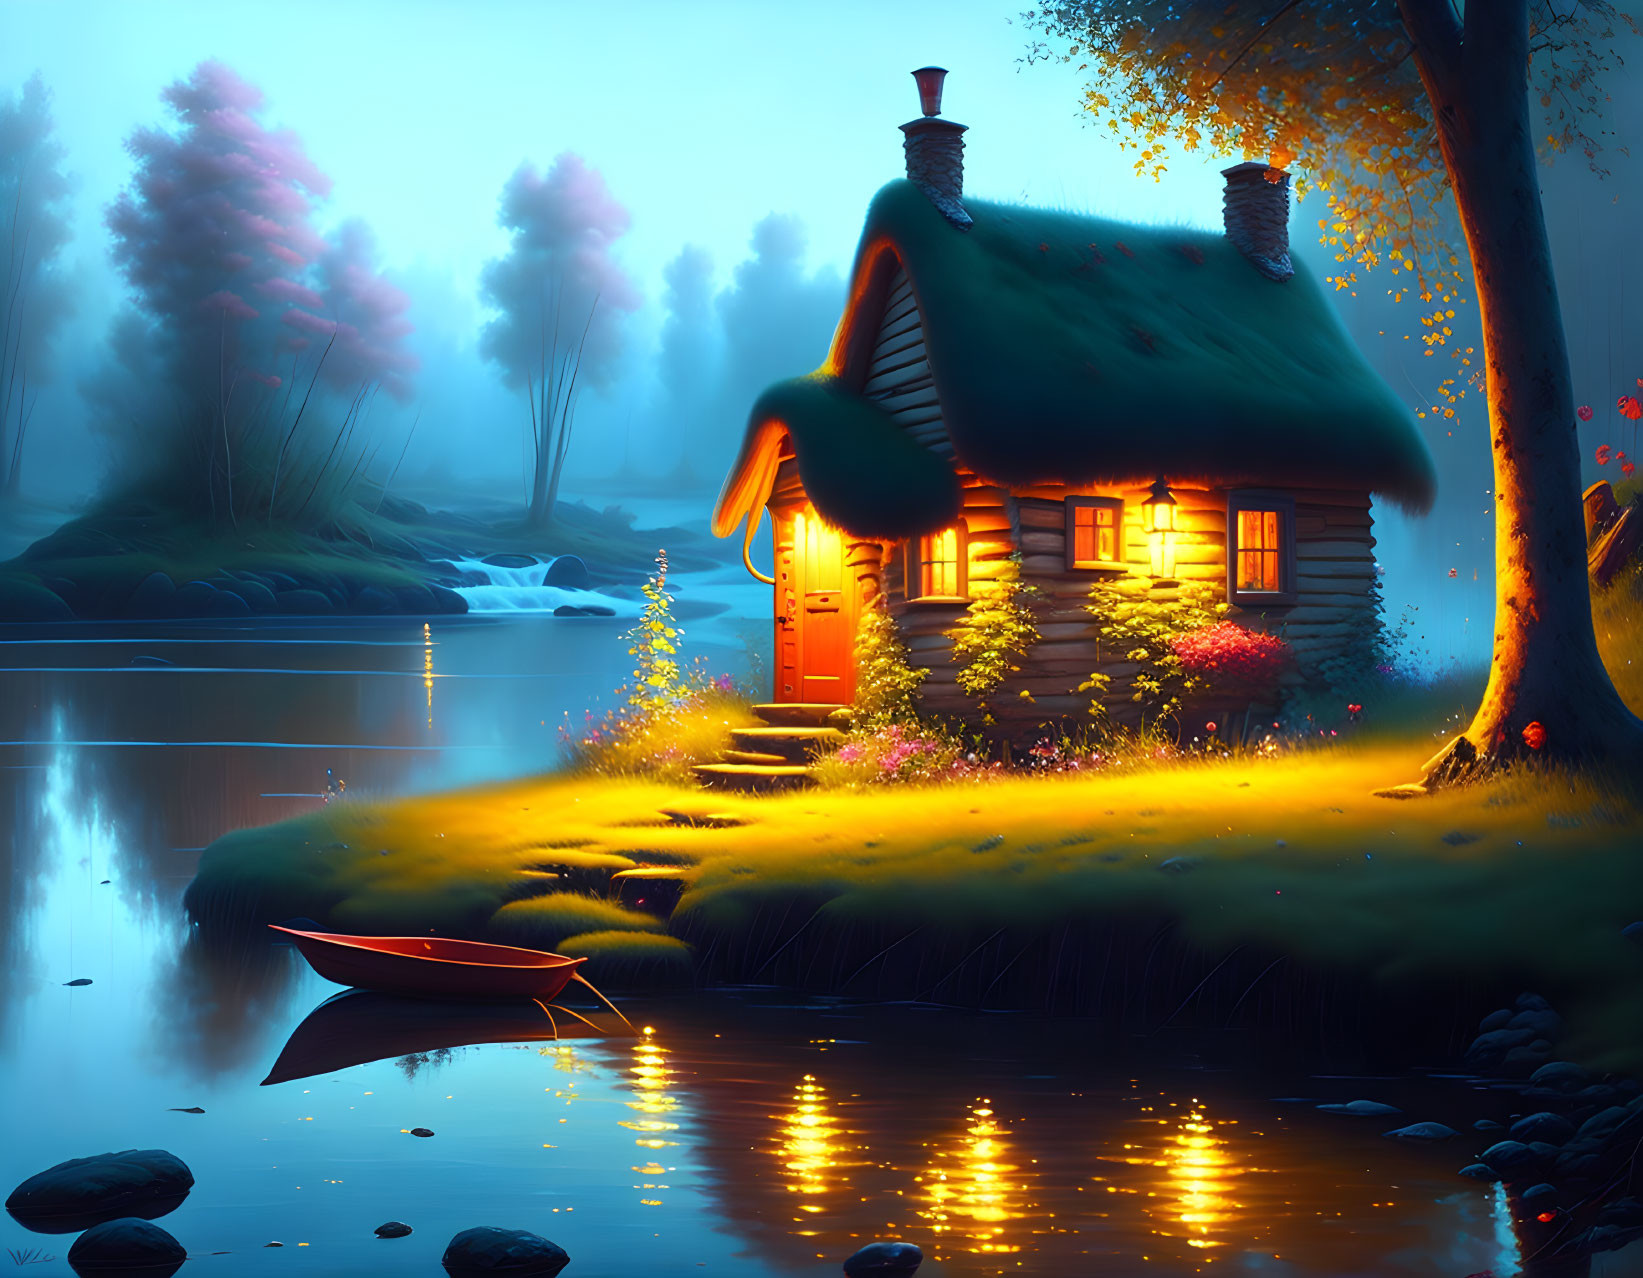 Tranquil river twilight scene with cozy cottage and glowing lights